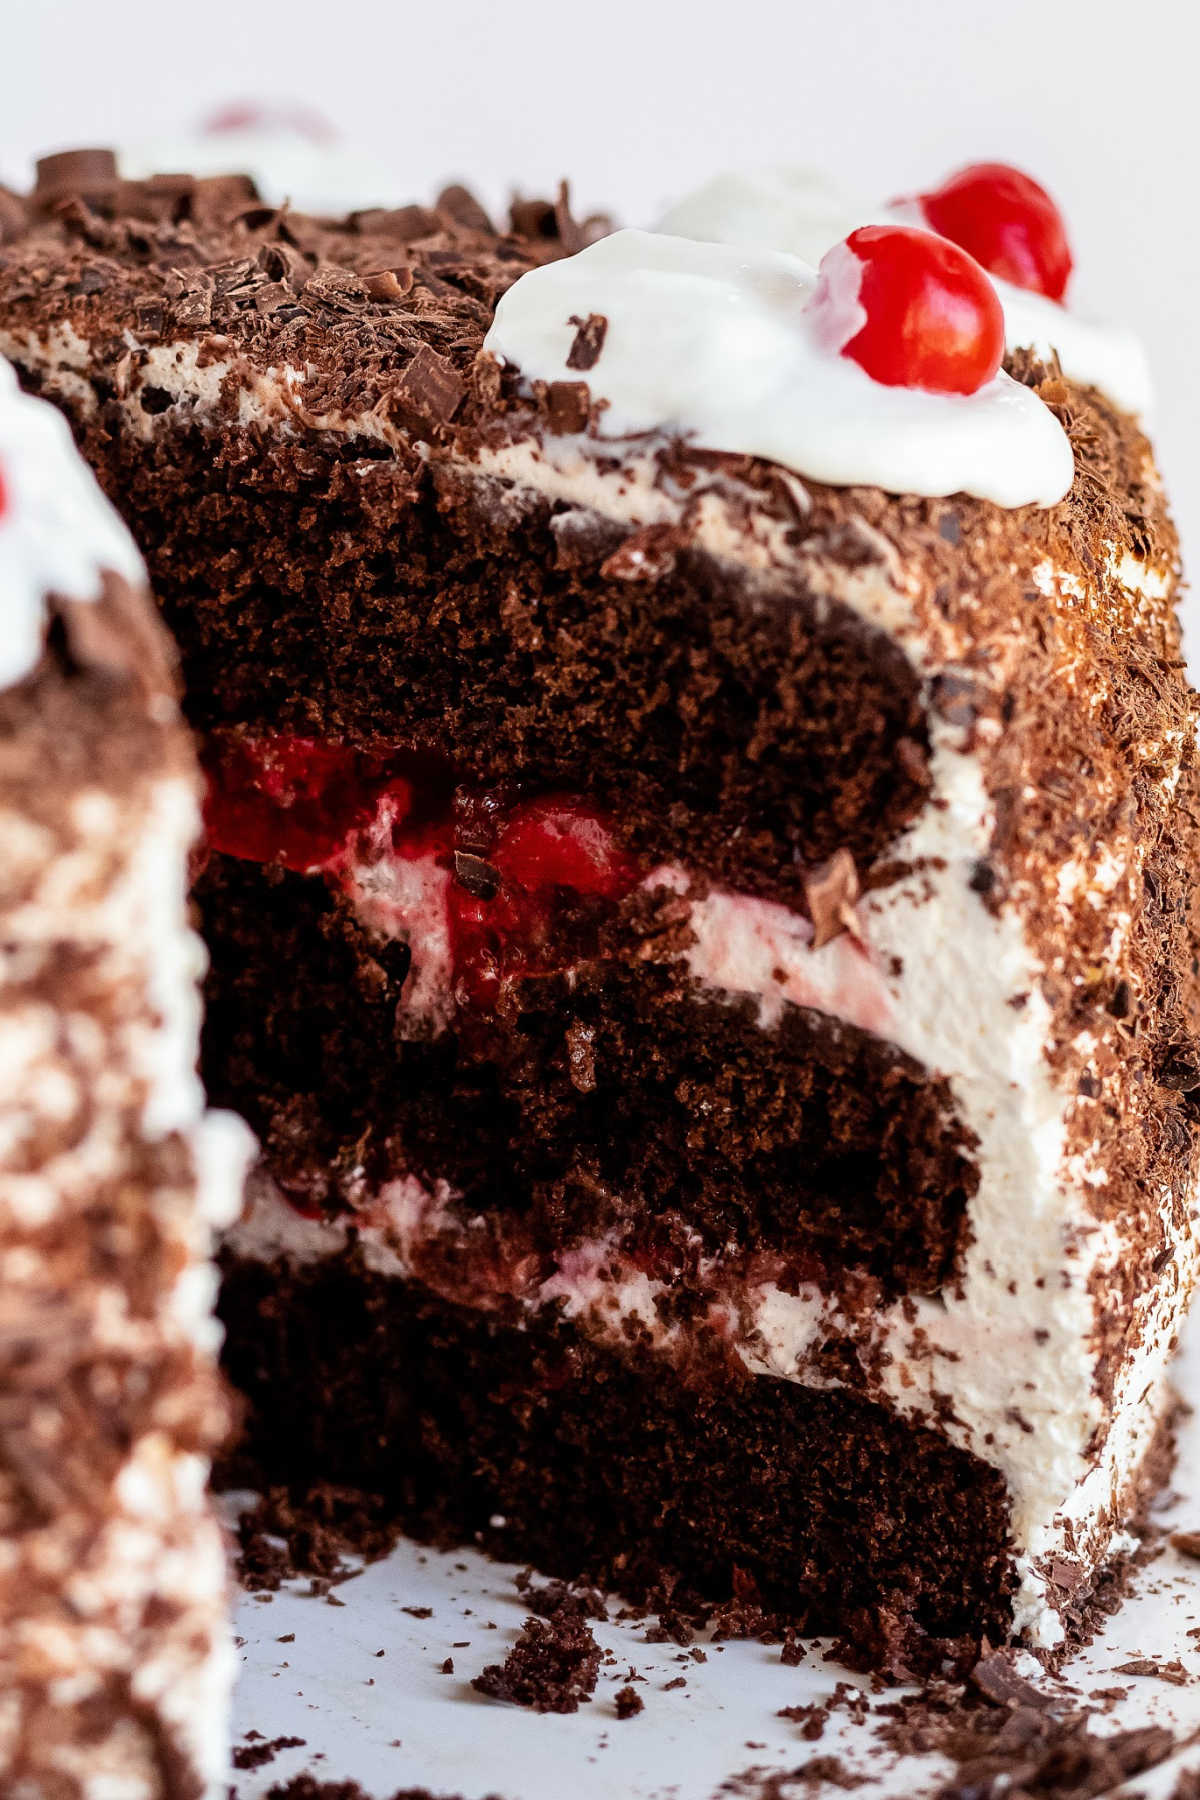 This homemade Black Forest Cherry Cake is a bakery-quality dessert that folks rave about! It's a cake you can serve for Christmas, birthdays, or anytime! via @foodfolksandfun